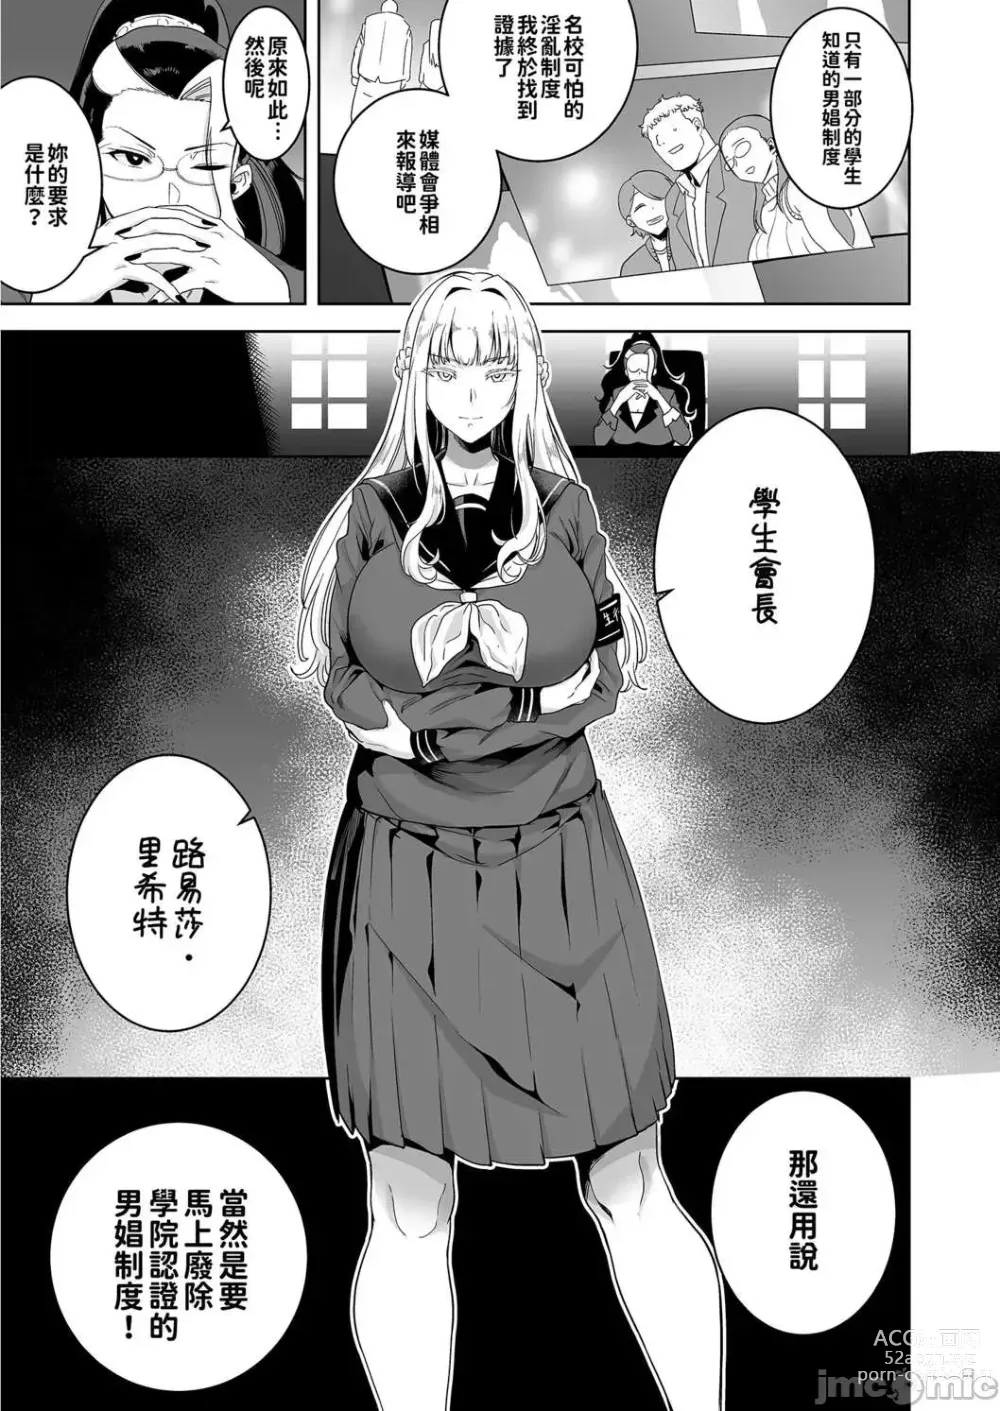 Page 95 of doujinshi Seika Girls Academys Officially Approved Prostitute Man 1 + 2 + 3